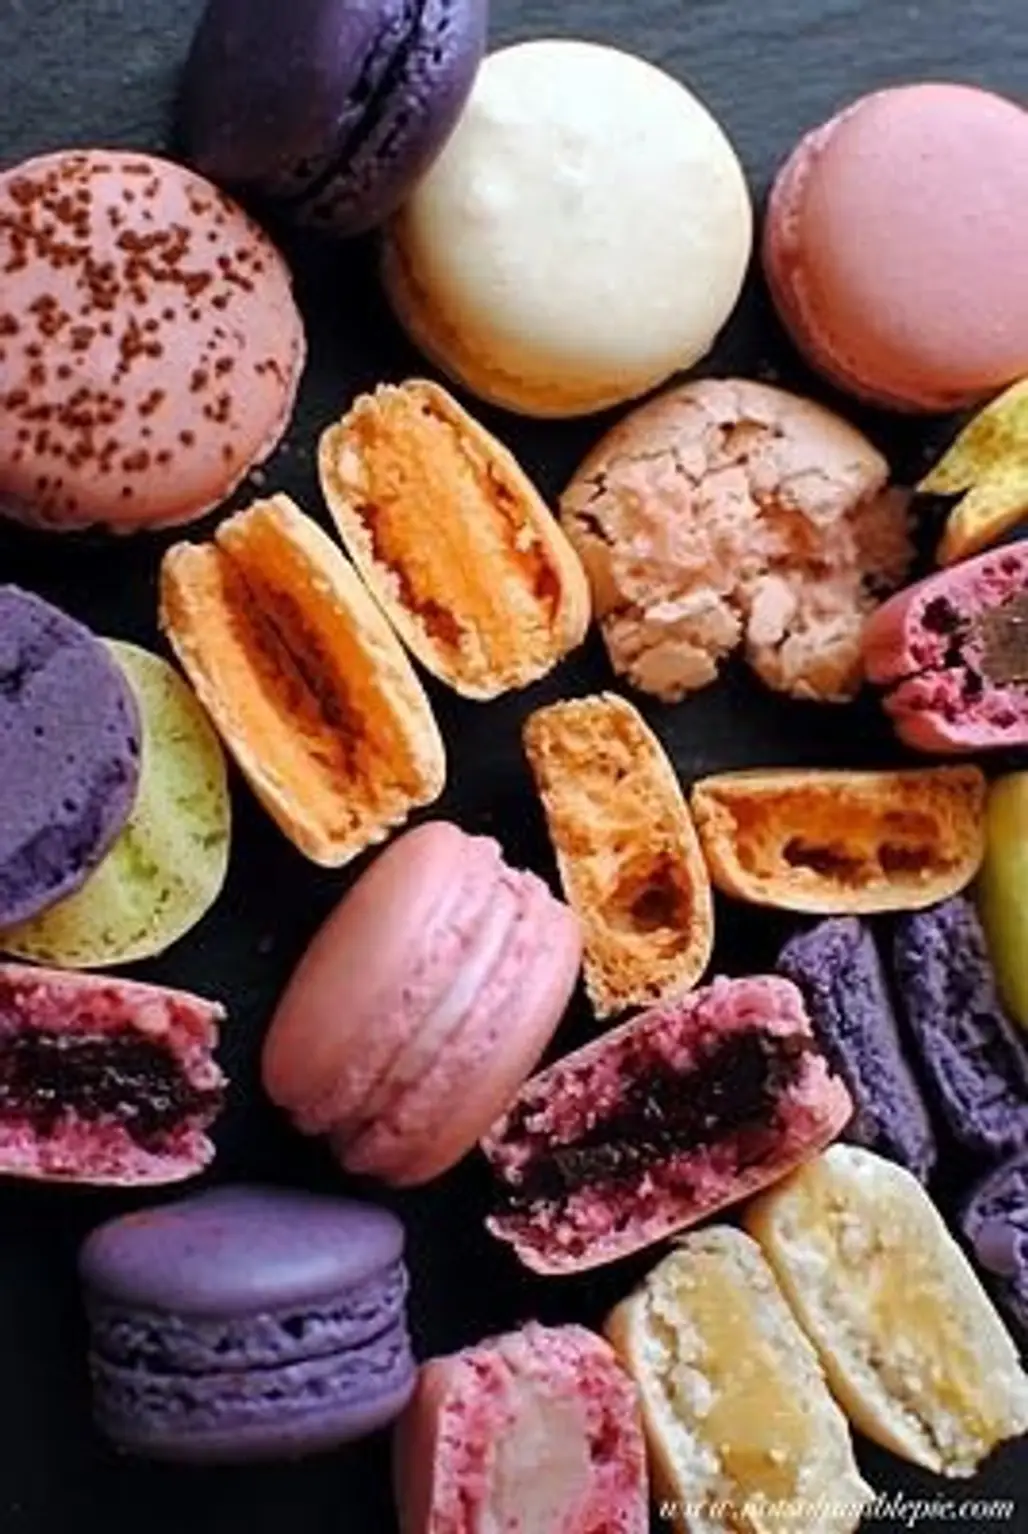 Lots of Flavors of Macarons